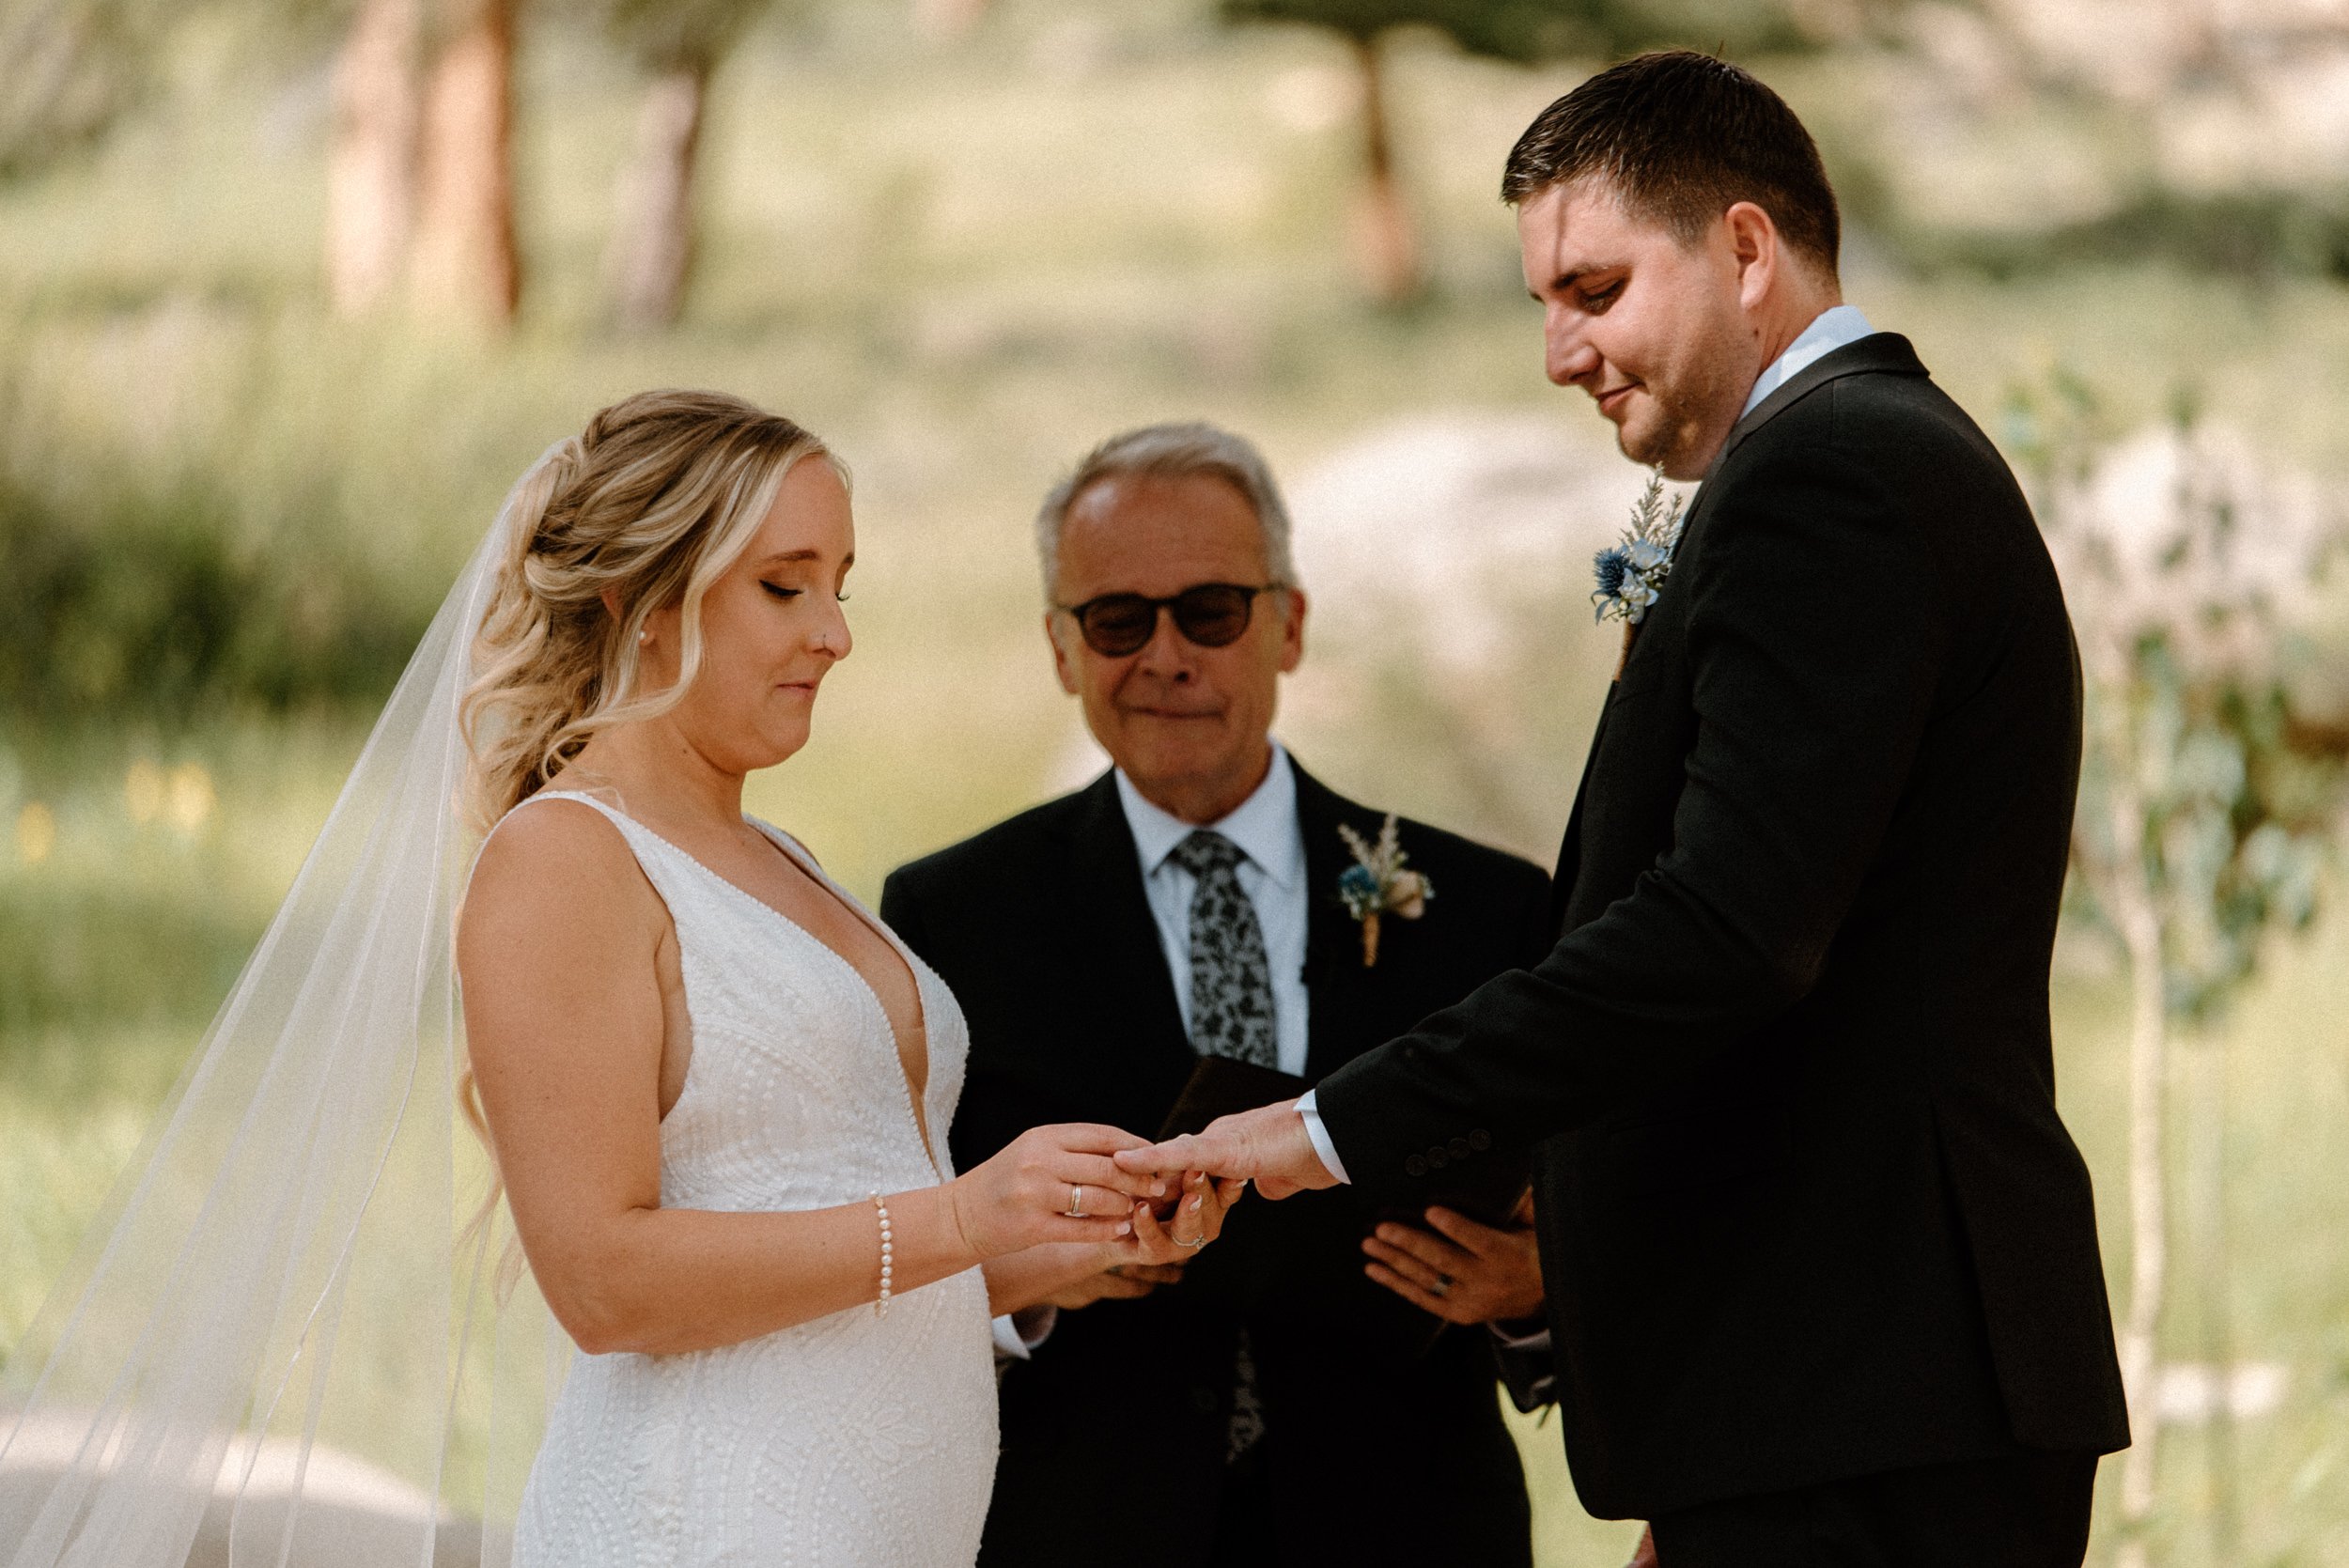 The bride places the wedding band on the groom's finger